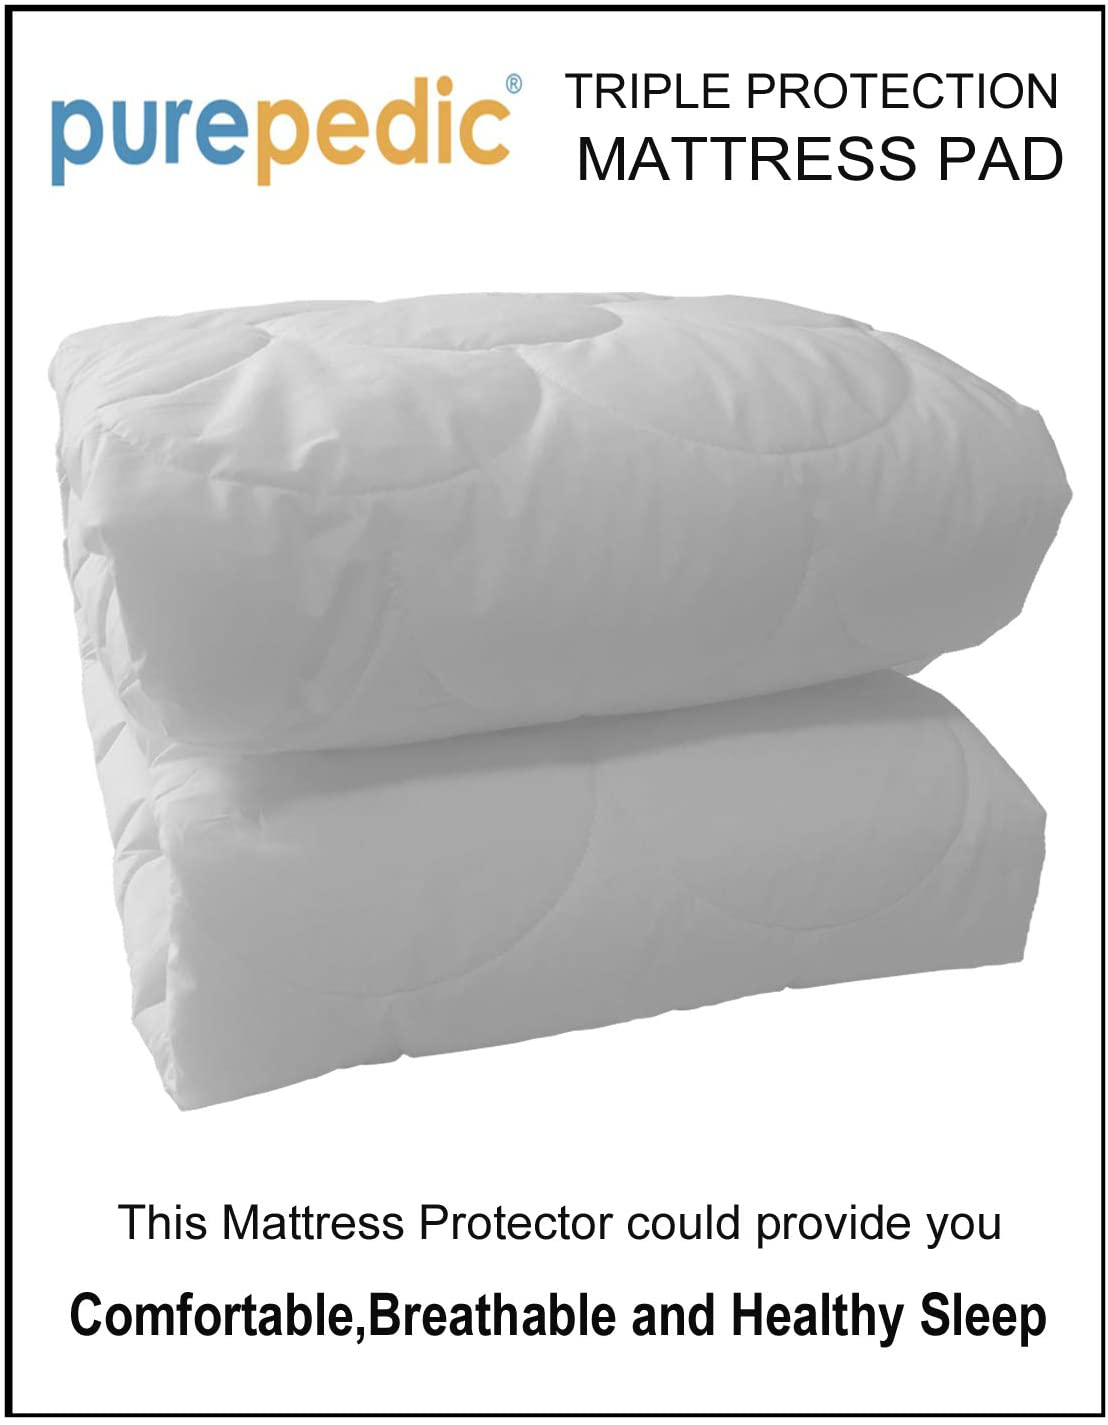 Purepedic Triple Protection Full Mattress Pad Full Size Bed Waterproof Mattress Protector Cooling Mattress Topper Cotton Mattress Cover Comfortable Mattress Encasement for Full Size Bed